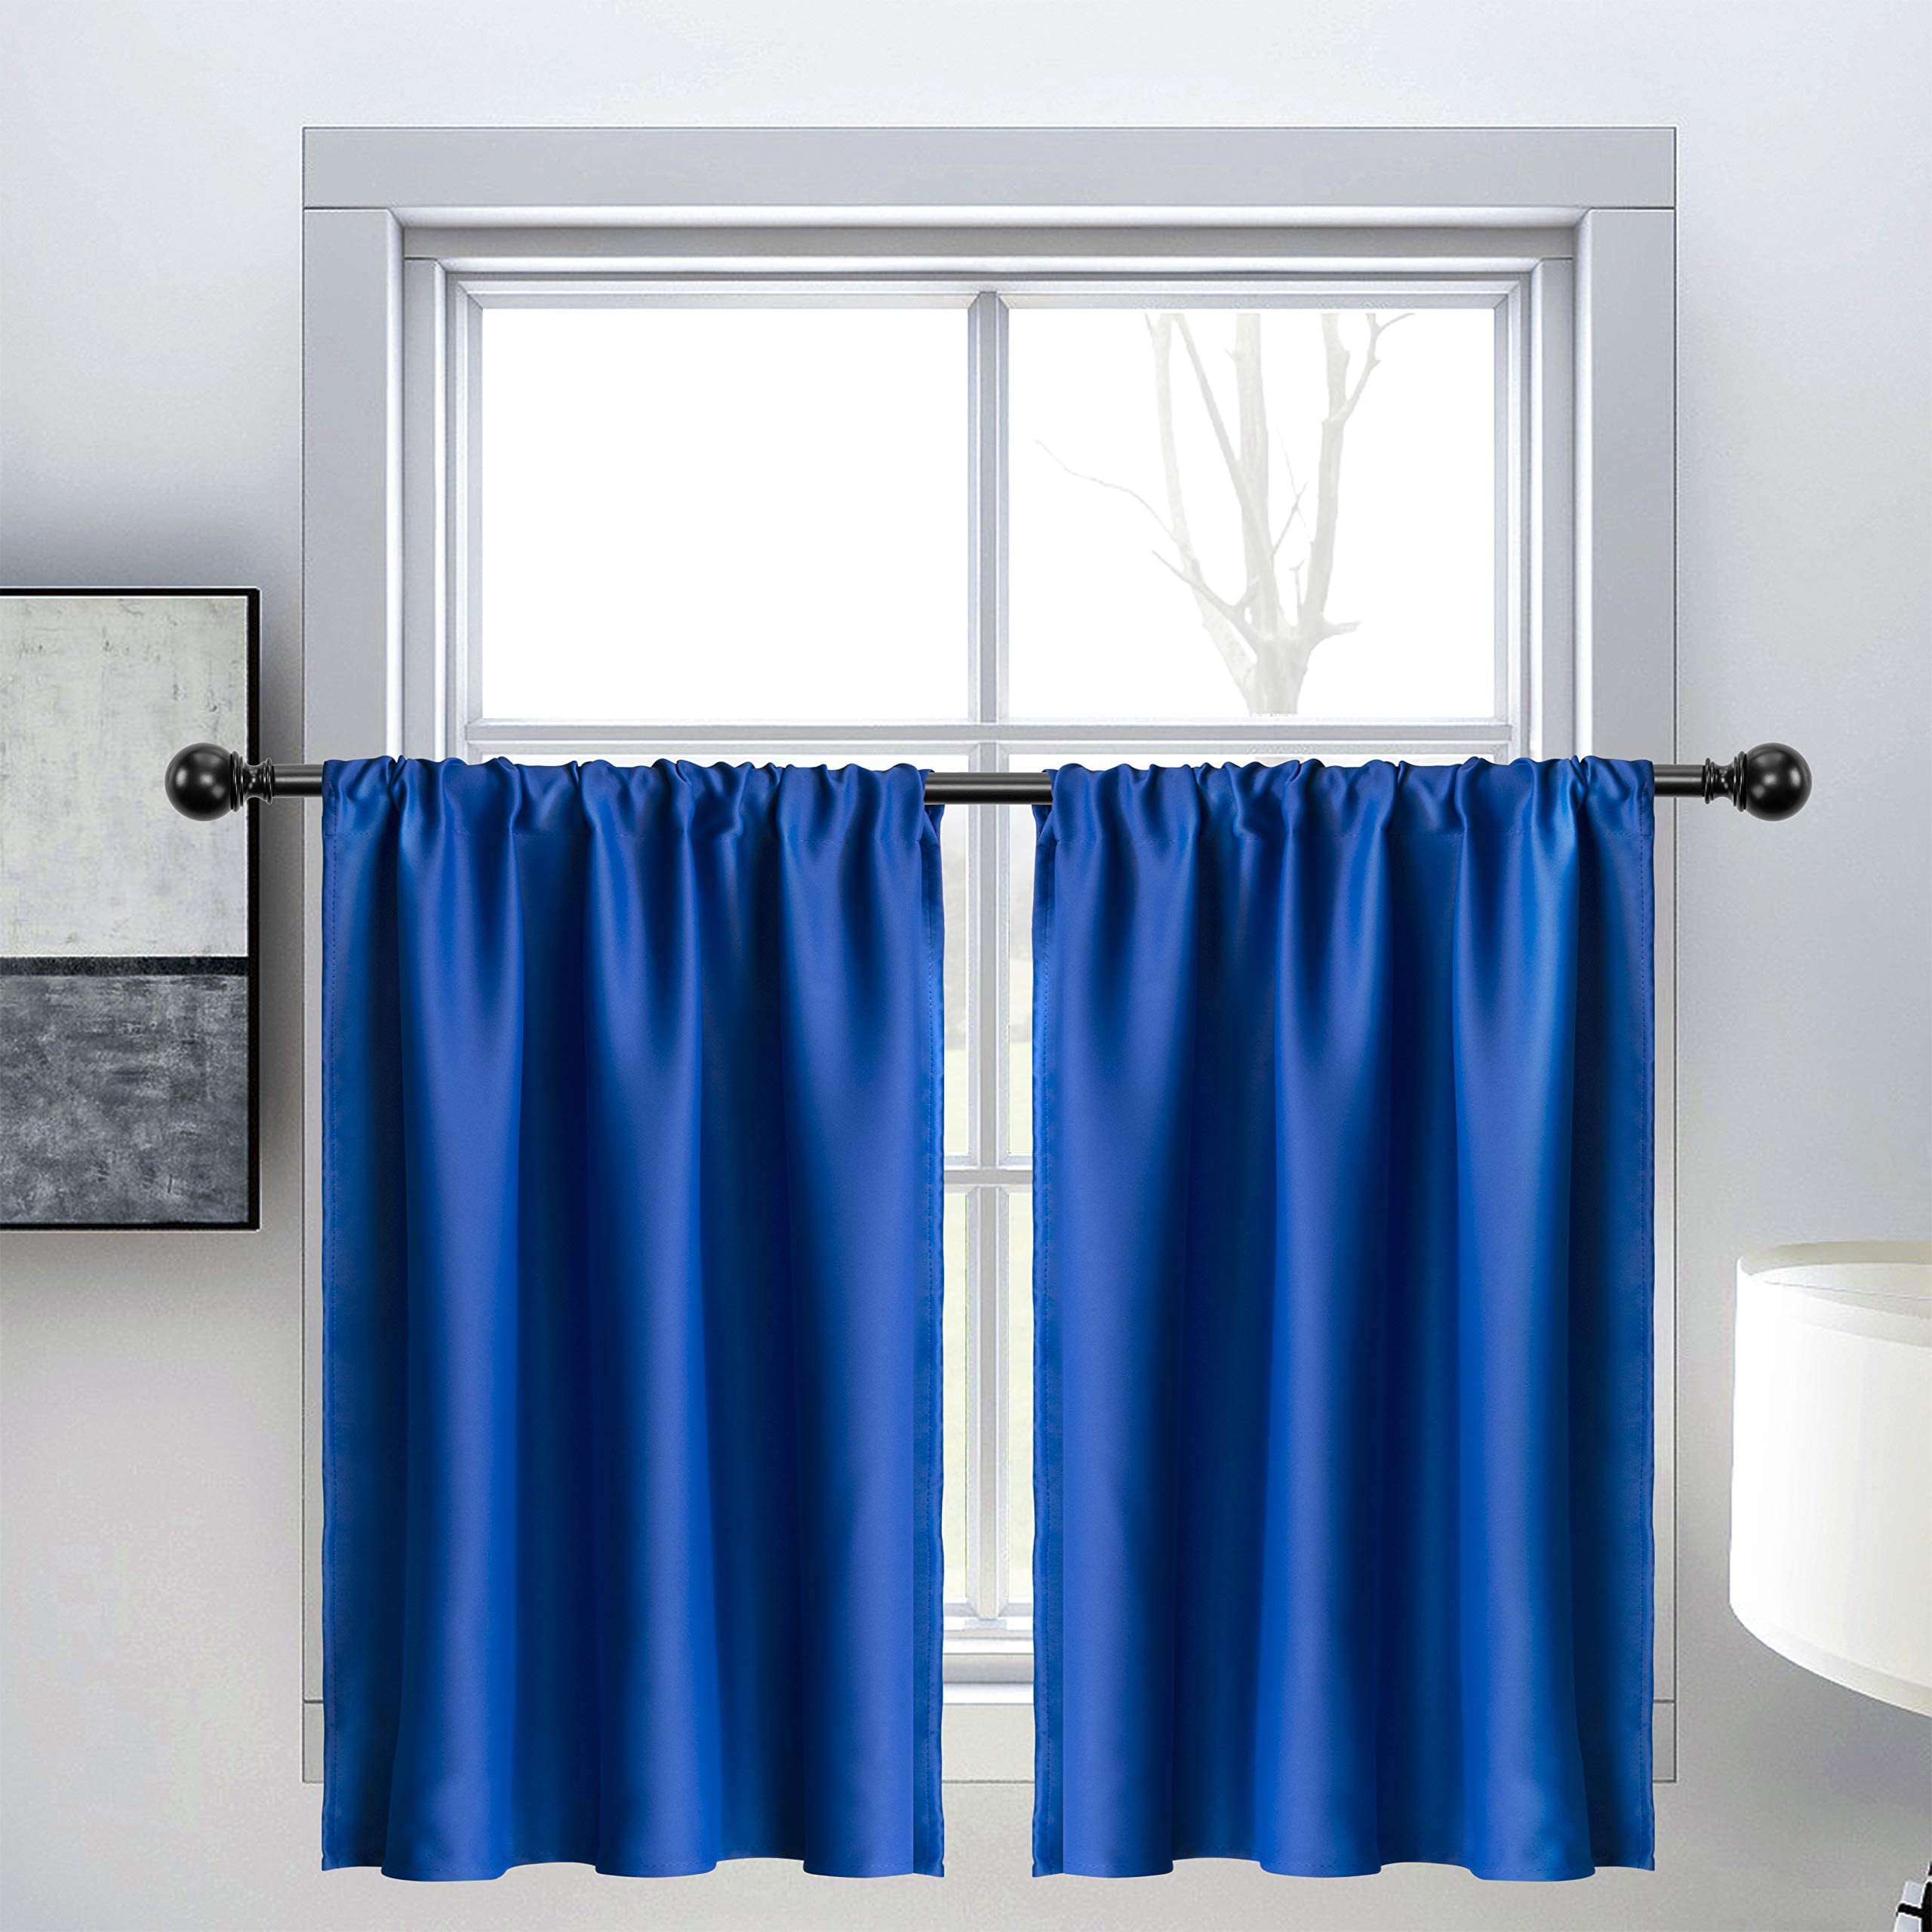 Navy Blue,1 Panel,36 W X 16 Inches Long Grommet Top Short Kitchen Window Treatment Curtain Window Valance for Living Room SeeGlee 36 Inches Wide Small Blackout Valance for Bathroom